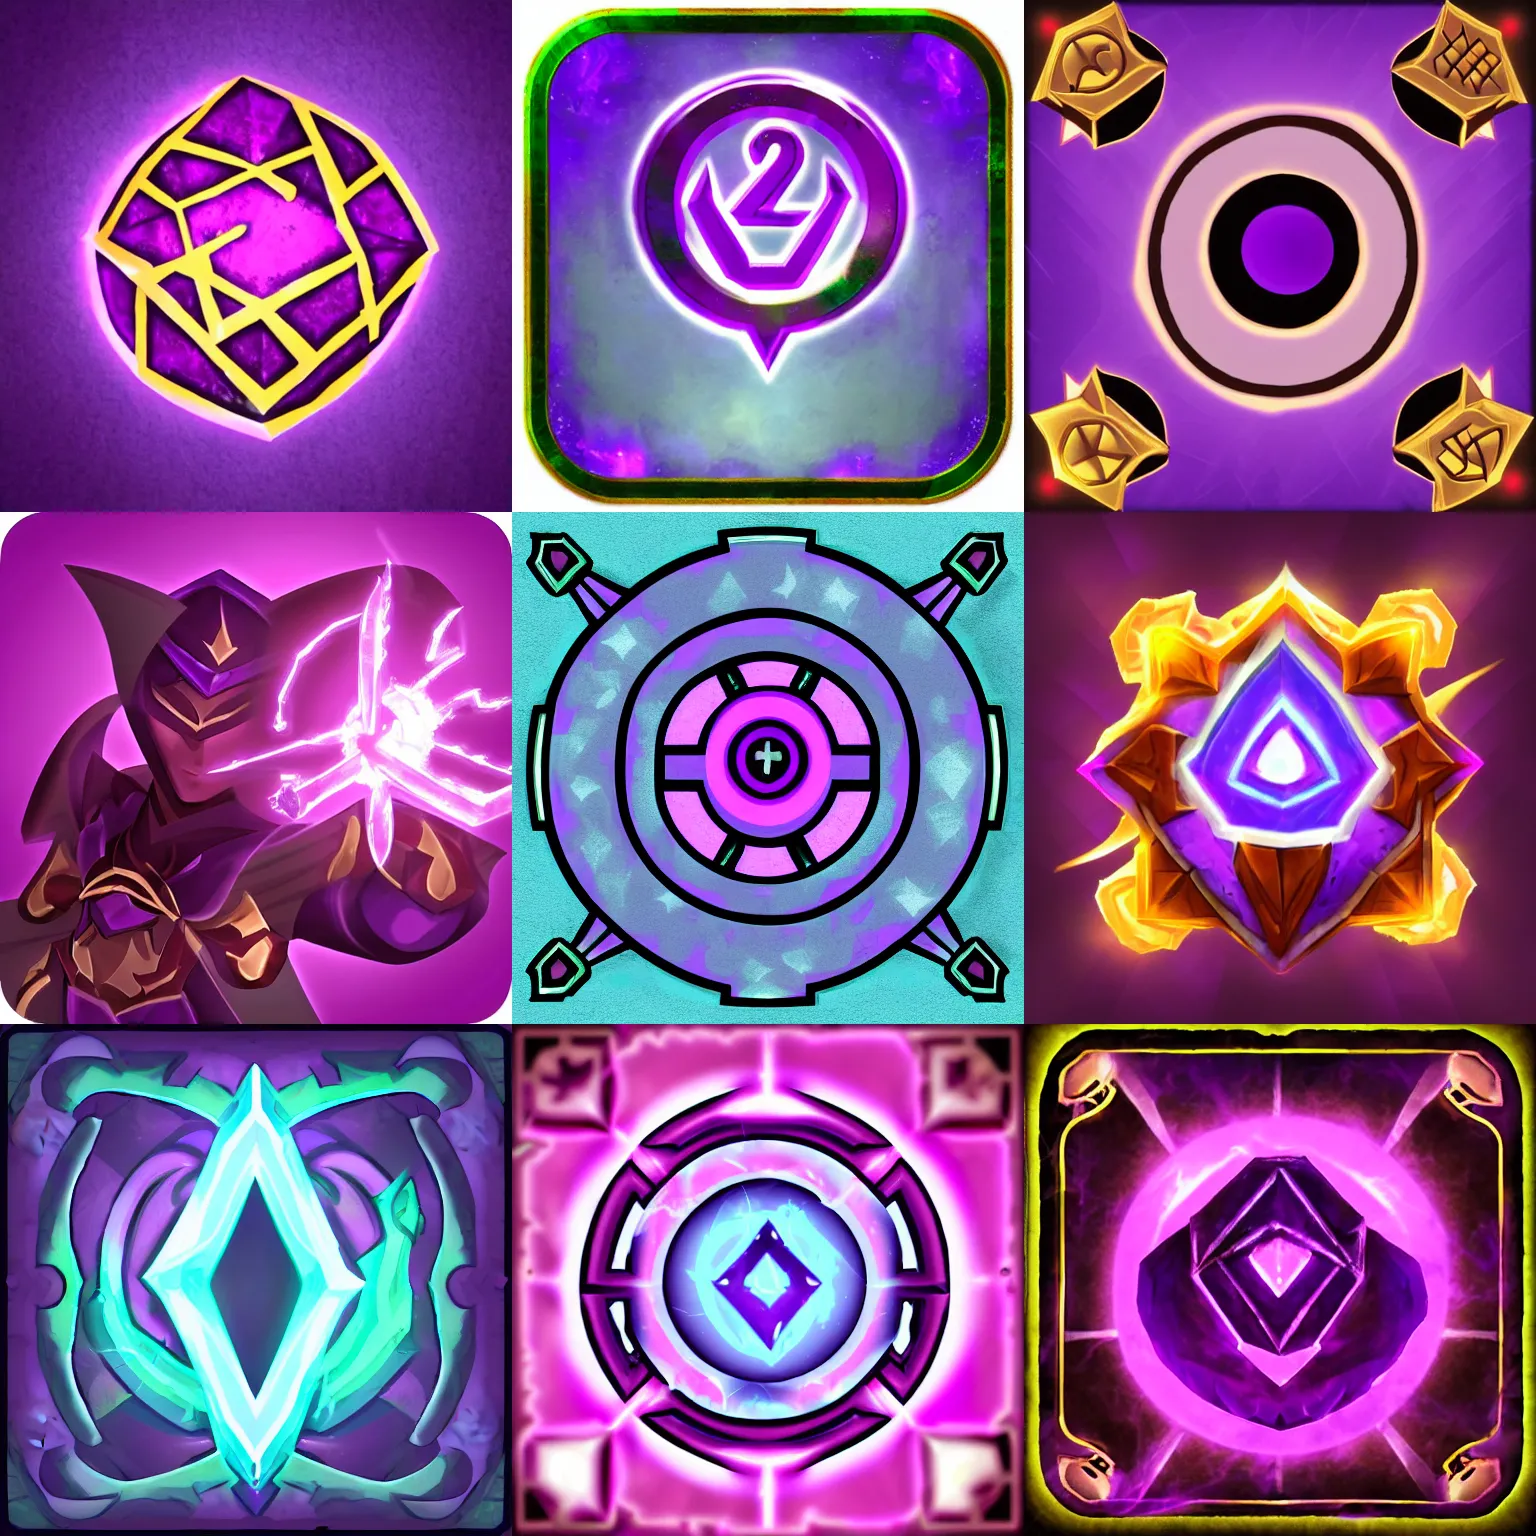 Prompt: a magic spell icon from rpg game, purple power, league of legends style, ambient light background